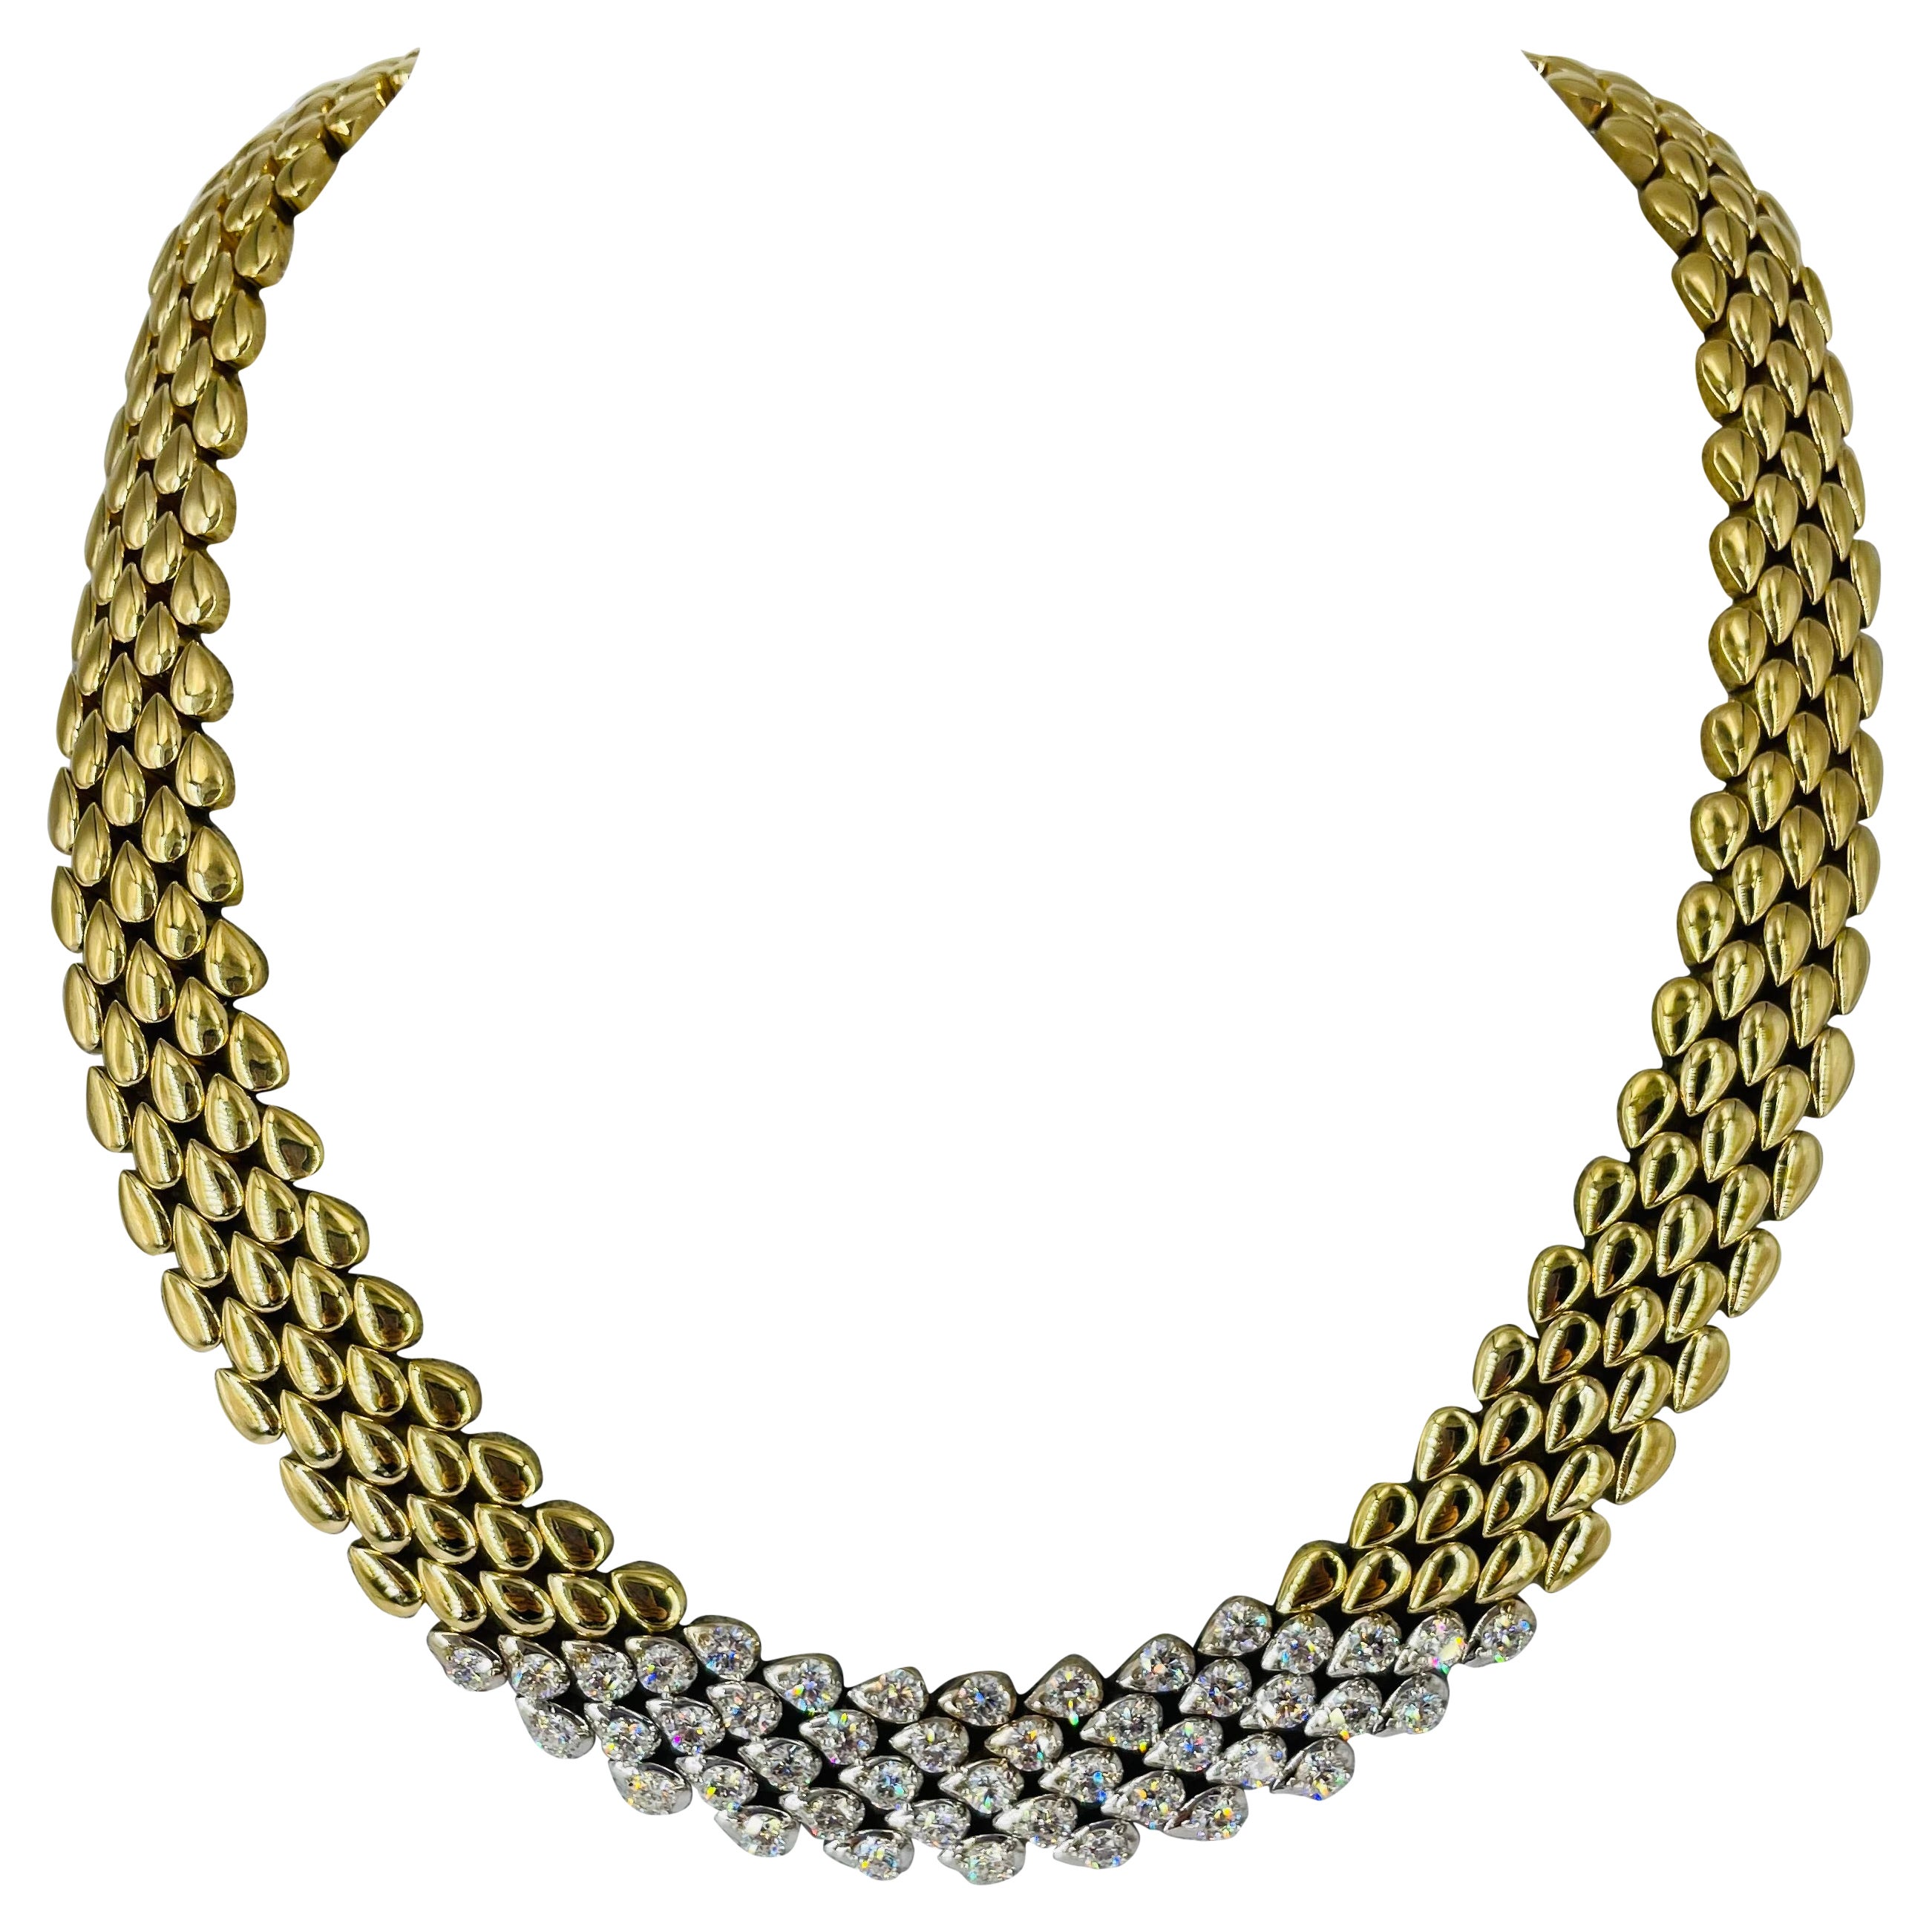 18K Yellow Gold Multi Row Choker Necklace with 8.25 carat Round Diamonds For Sale